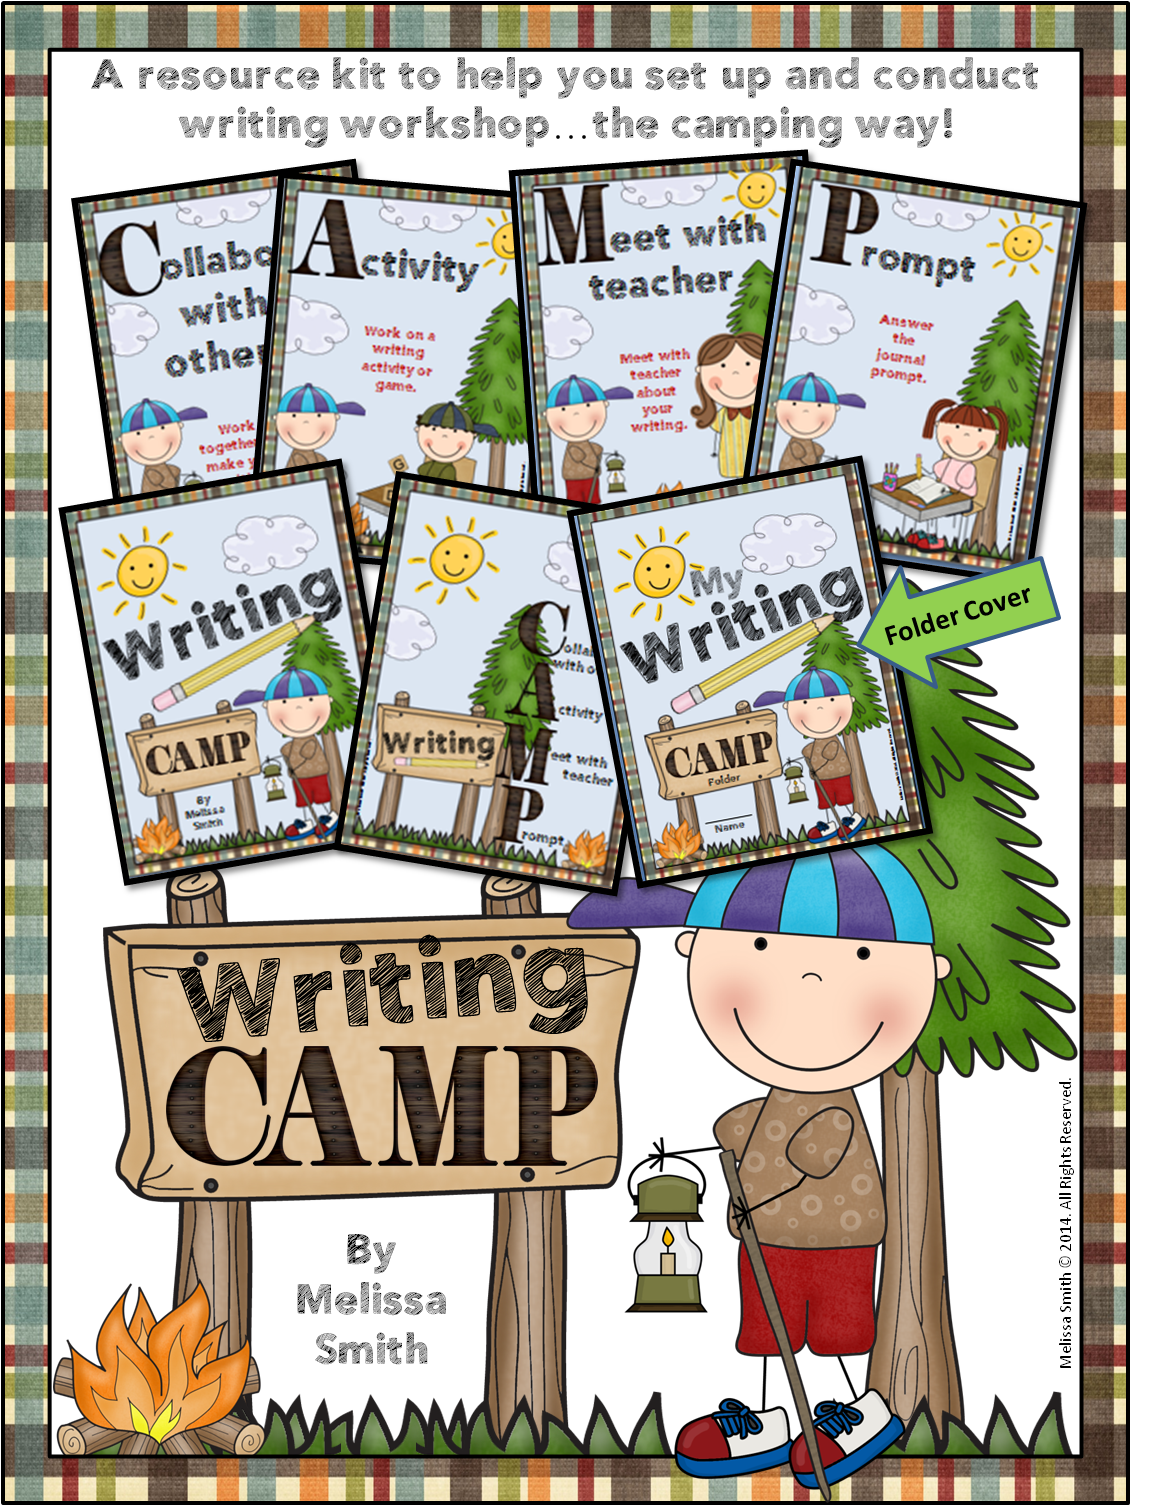 http://www.teacherspayteachers.com/Product/Writing-CAMP-Writing-Workshop-with-a-Camping-Theme-1127113